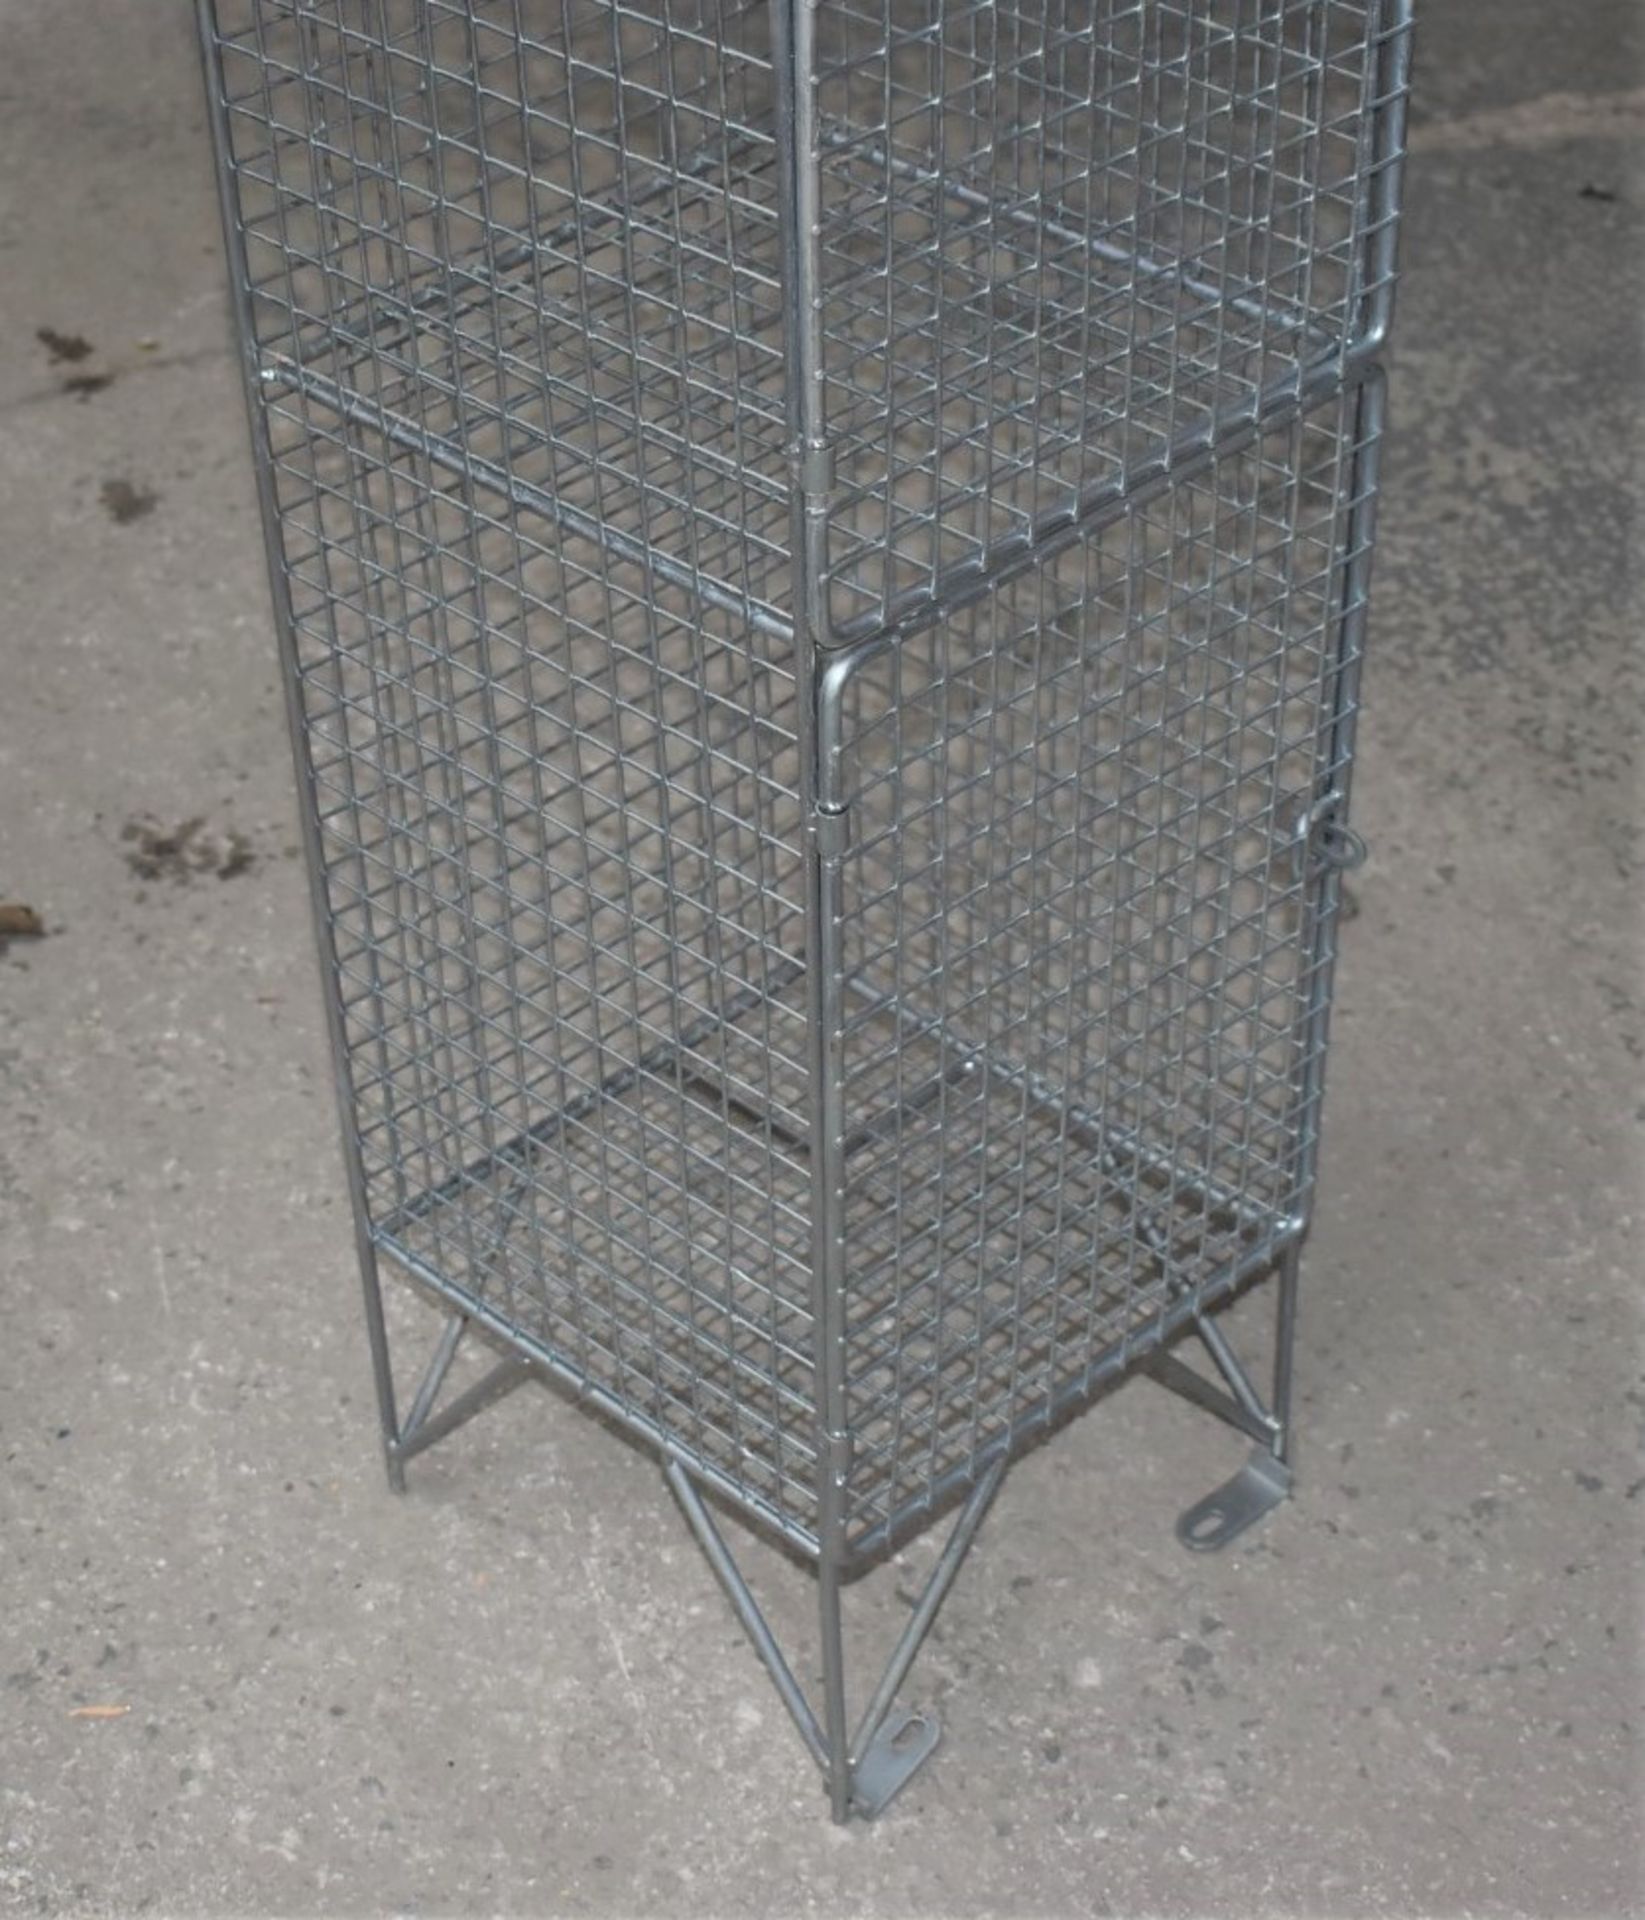 1 x Wire Mesh Cage Lockers With Four Locker Compartments - Dimensions: H193 x W30 x D32 cms - Ref: - Image 8 of 11